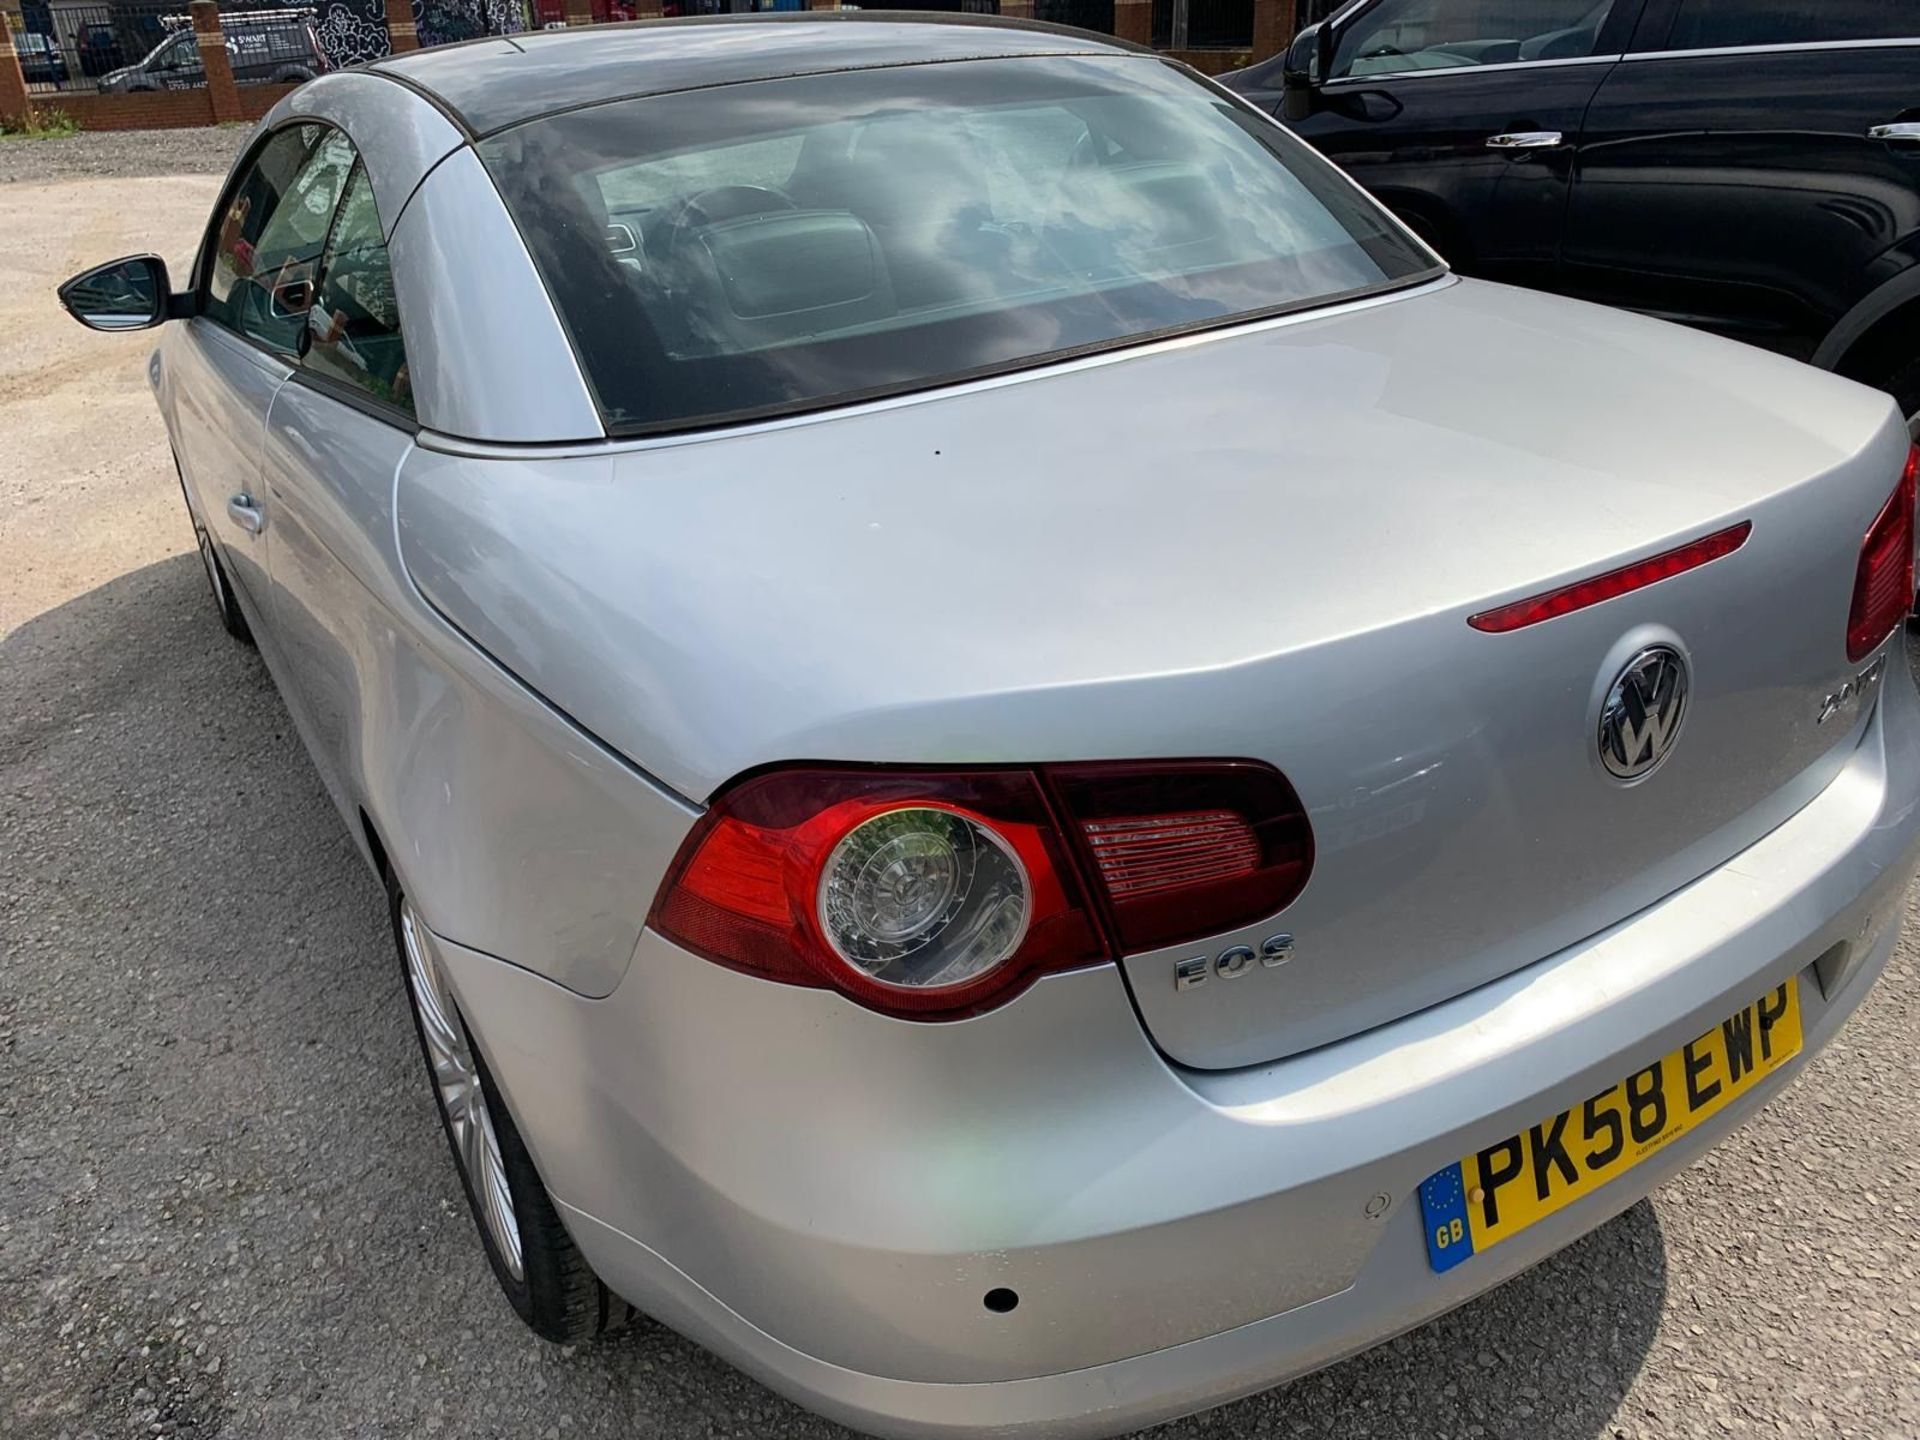 PK58 EWP VOLKSWAGEN EOS SILVER DIESEL MOT: 02.09.24 First Registration: 15.10.08 Number of services: - Image 5 of 10